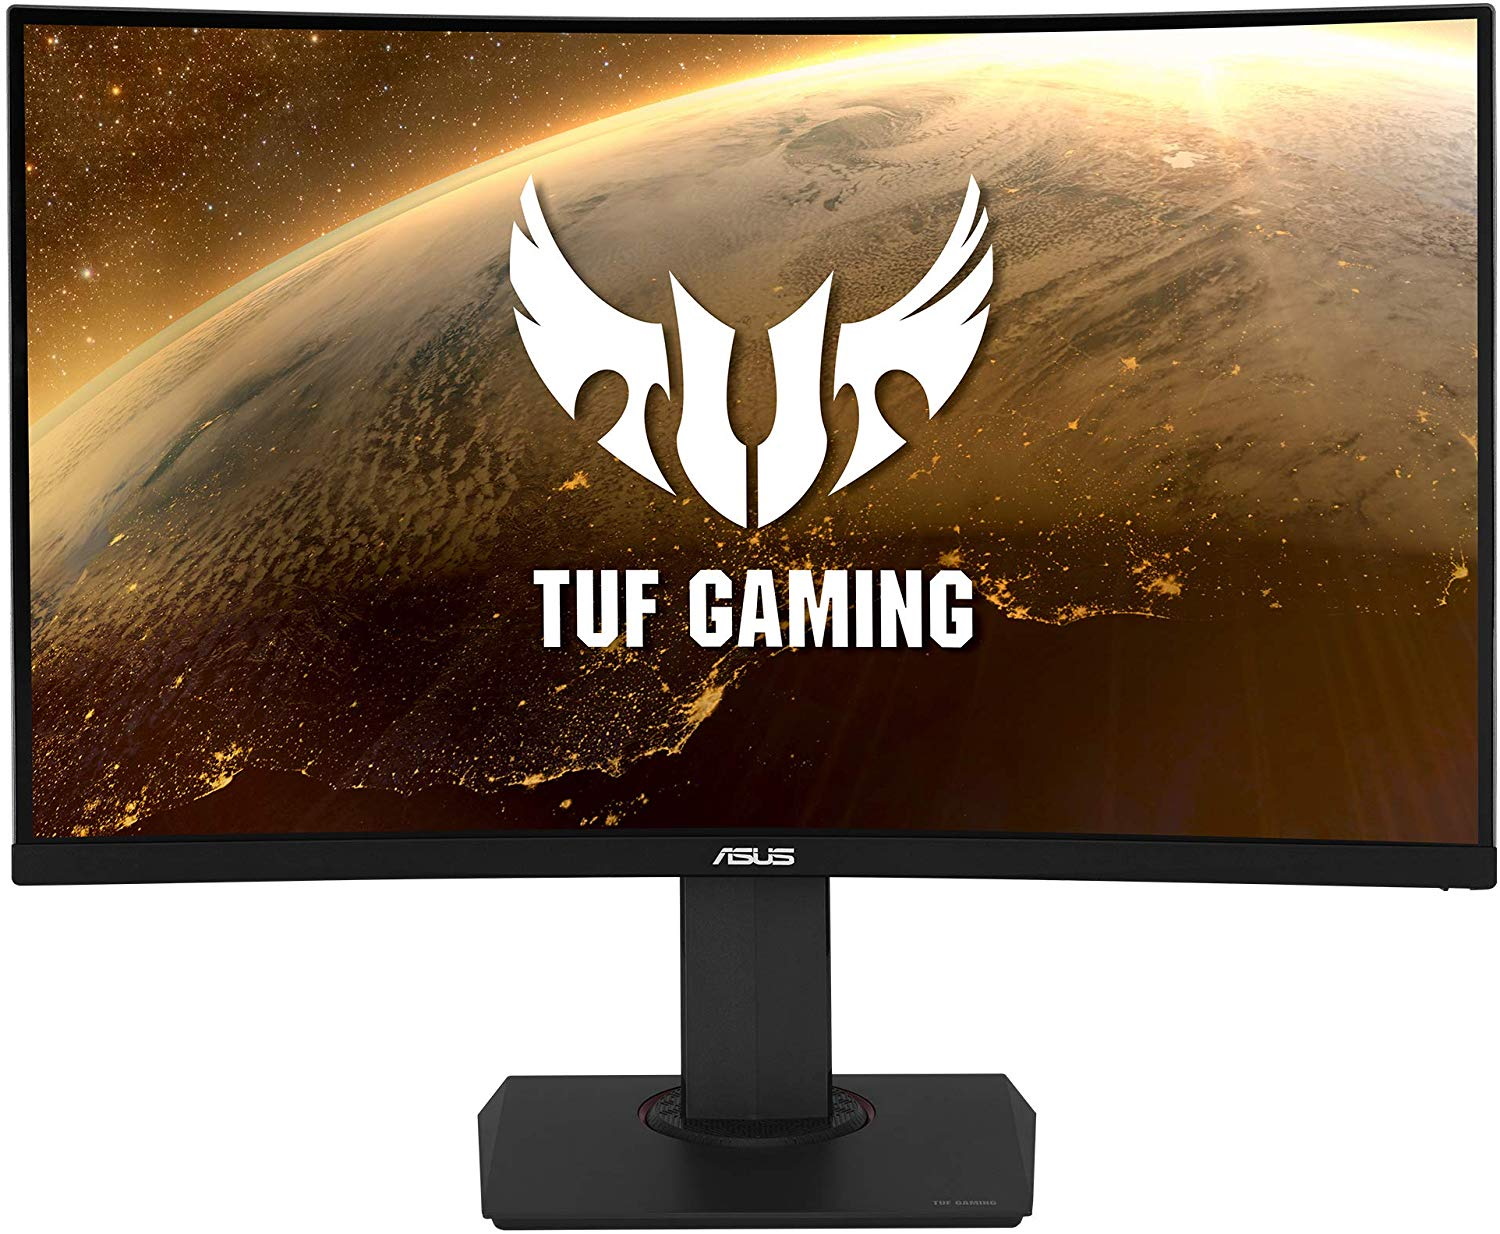 Blur statement Wink ASUS TUF Gaming VG32VQ 2560 x 1440 pixels LED Curved Gaming Monitor - 32 in